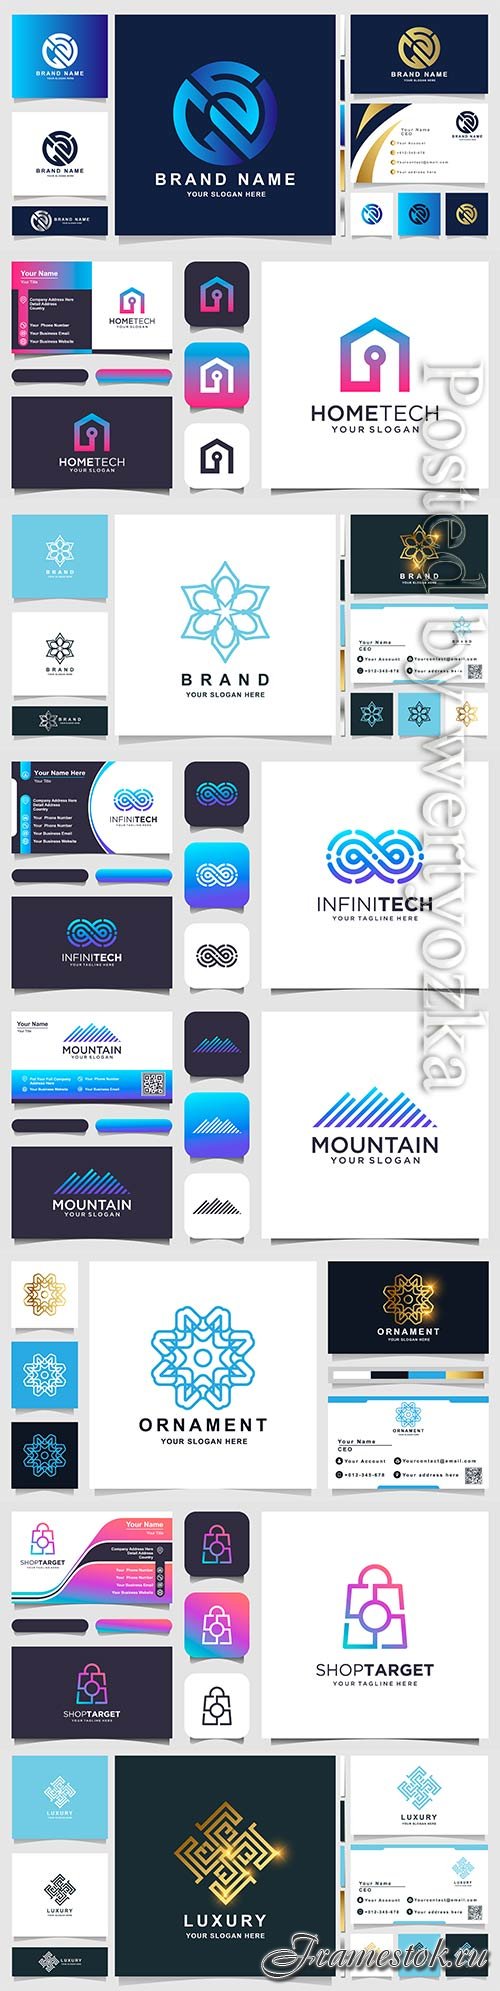 Logo design and business card vector template